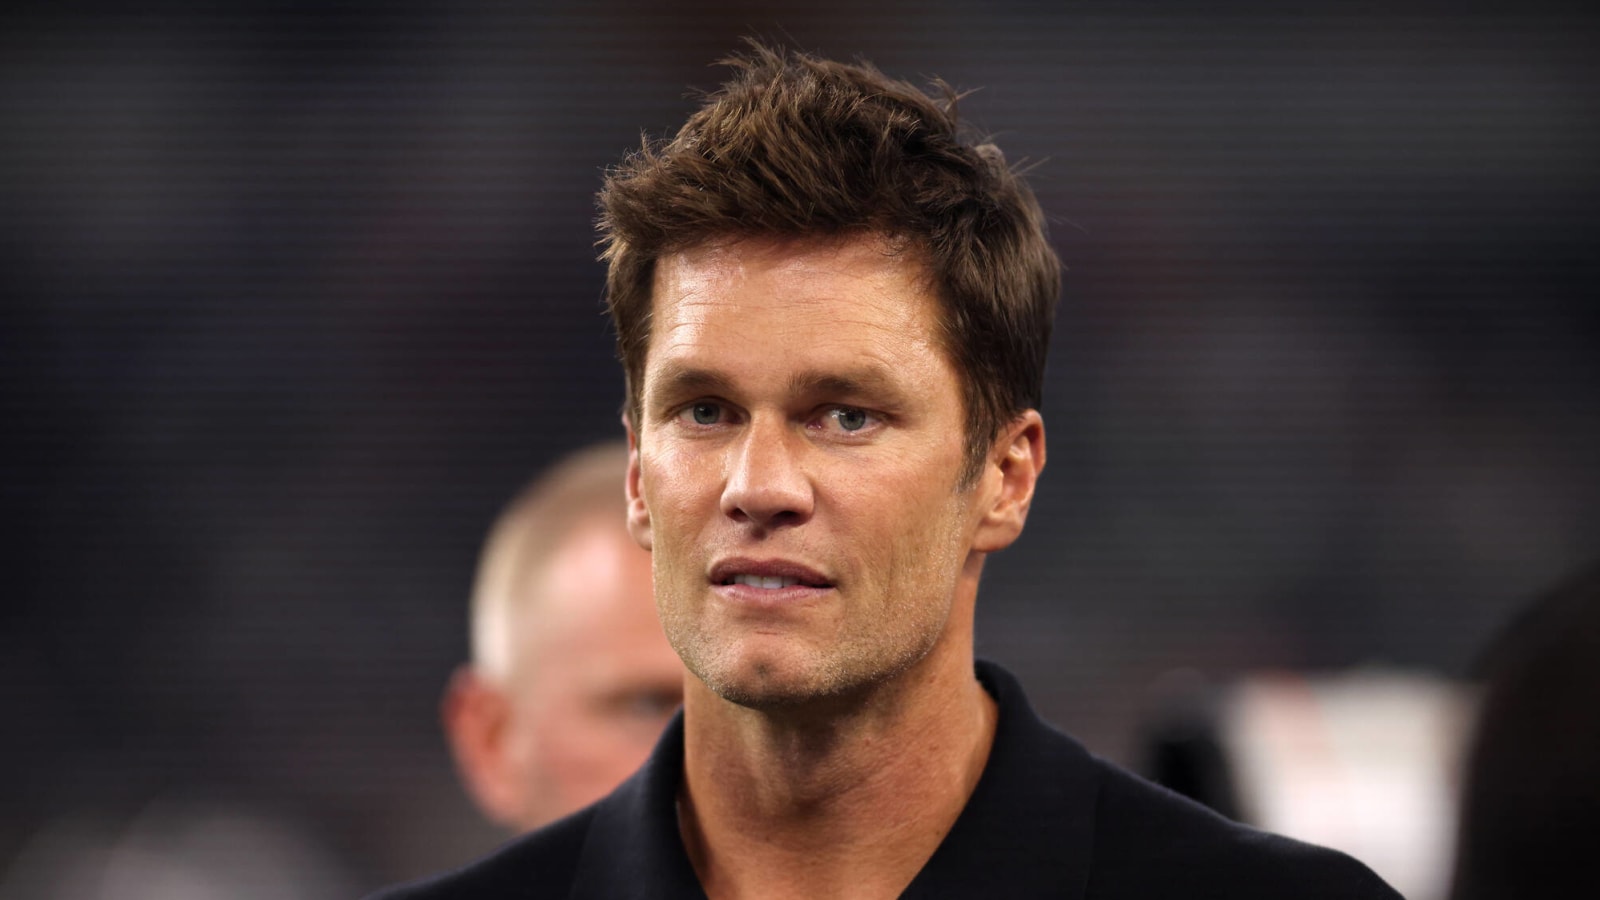 Tom Brady addresses attending first Patriots game as retired player